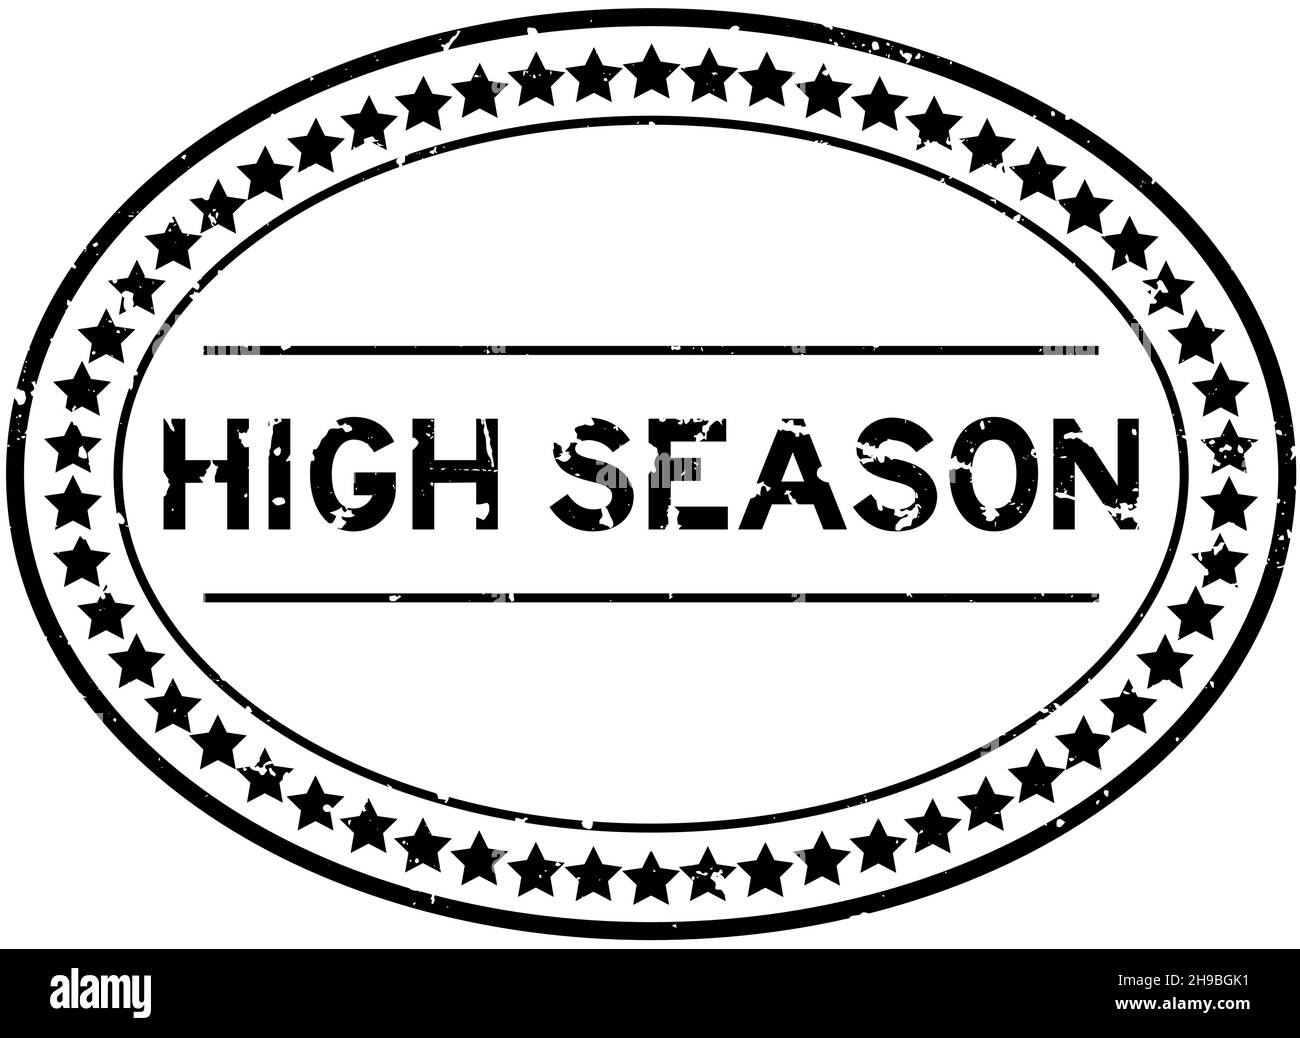 Grunge black high season word oval rubber seal stamp on white background Stock Vector